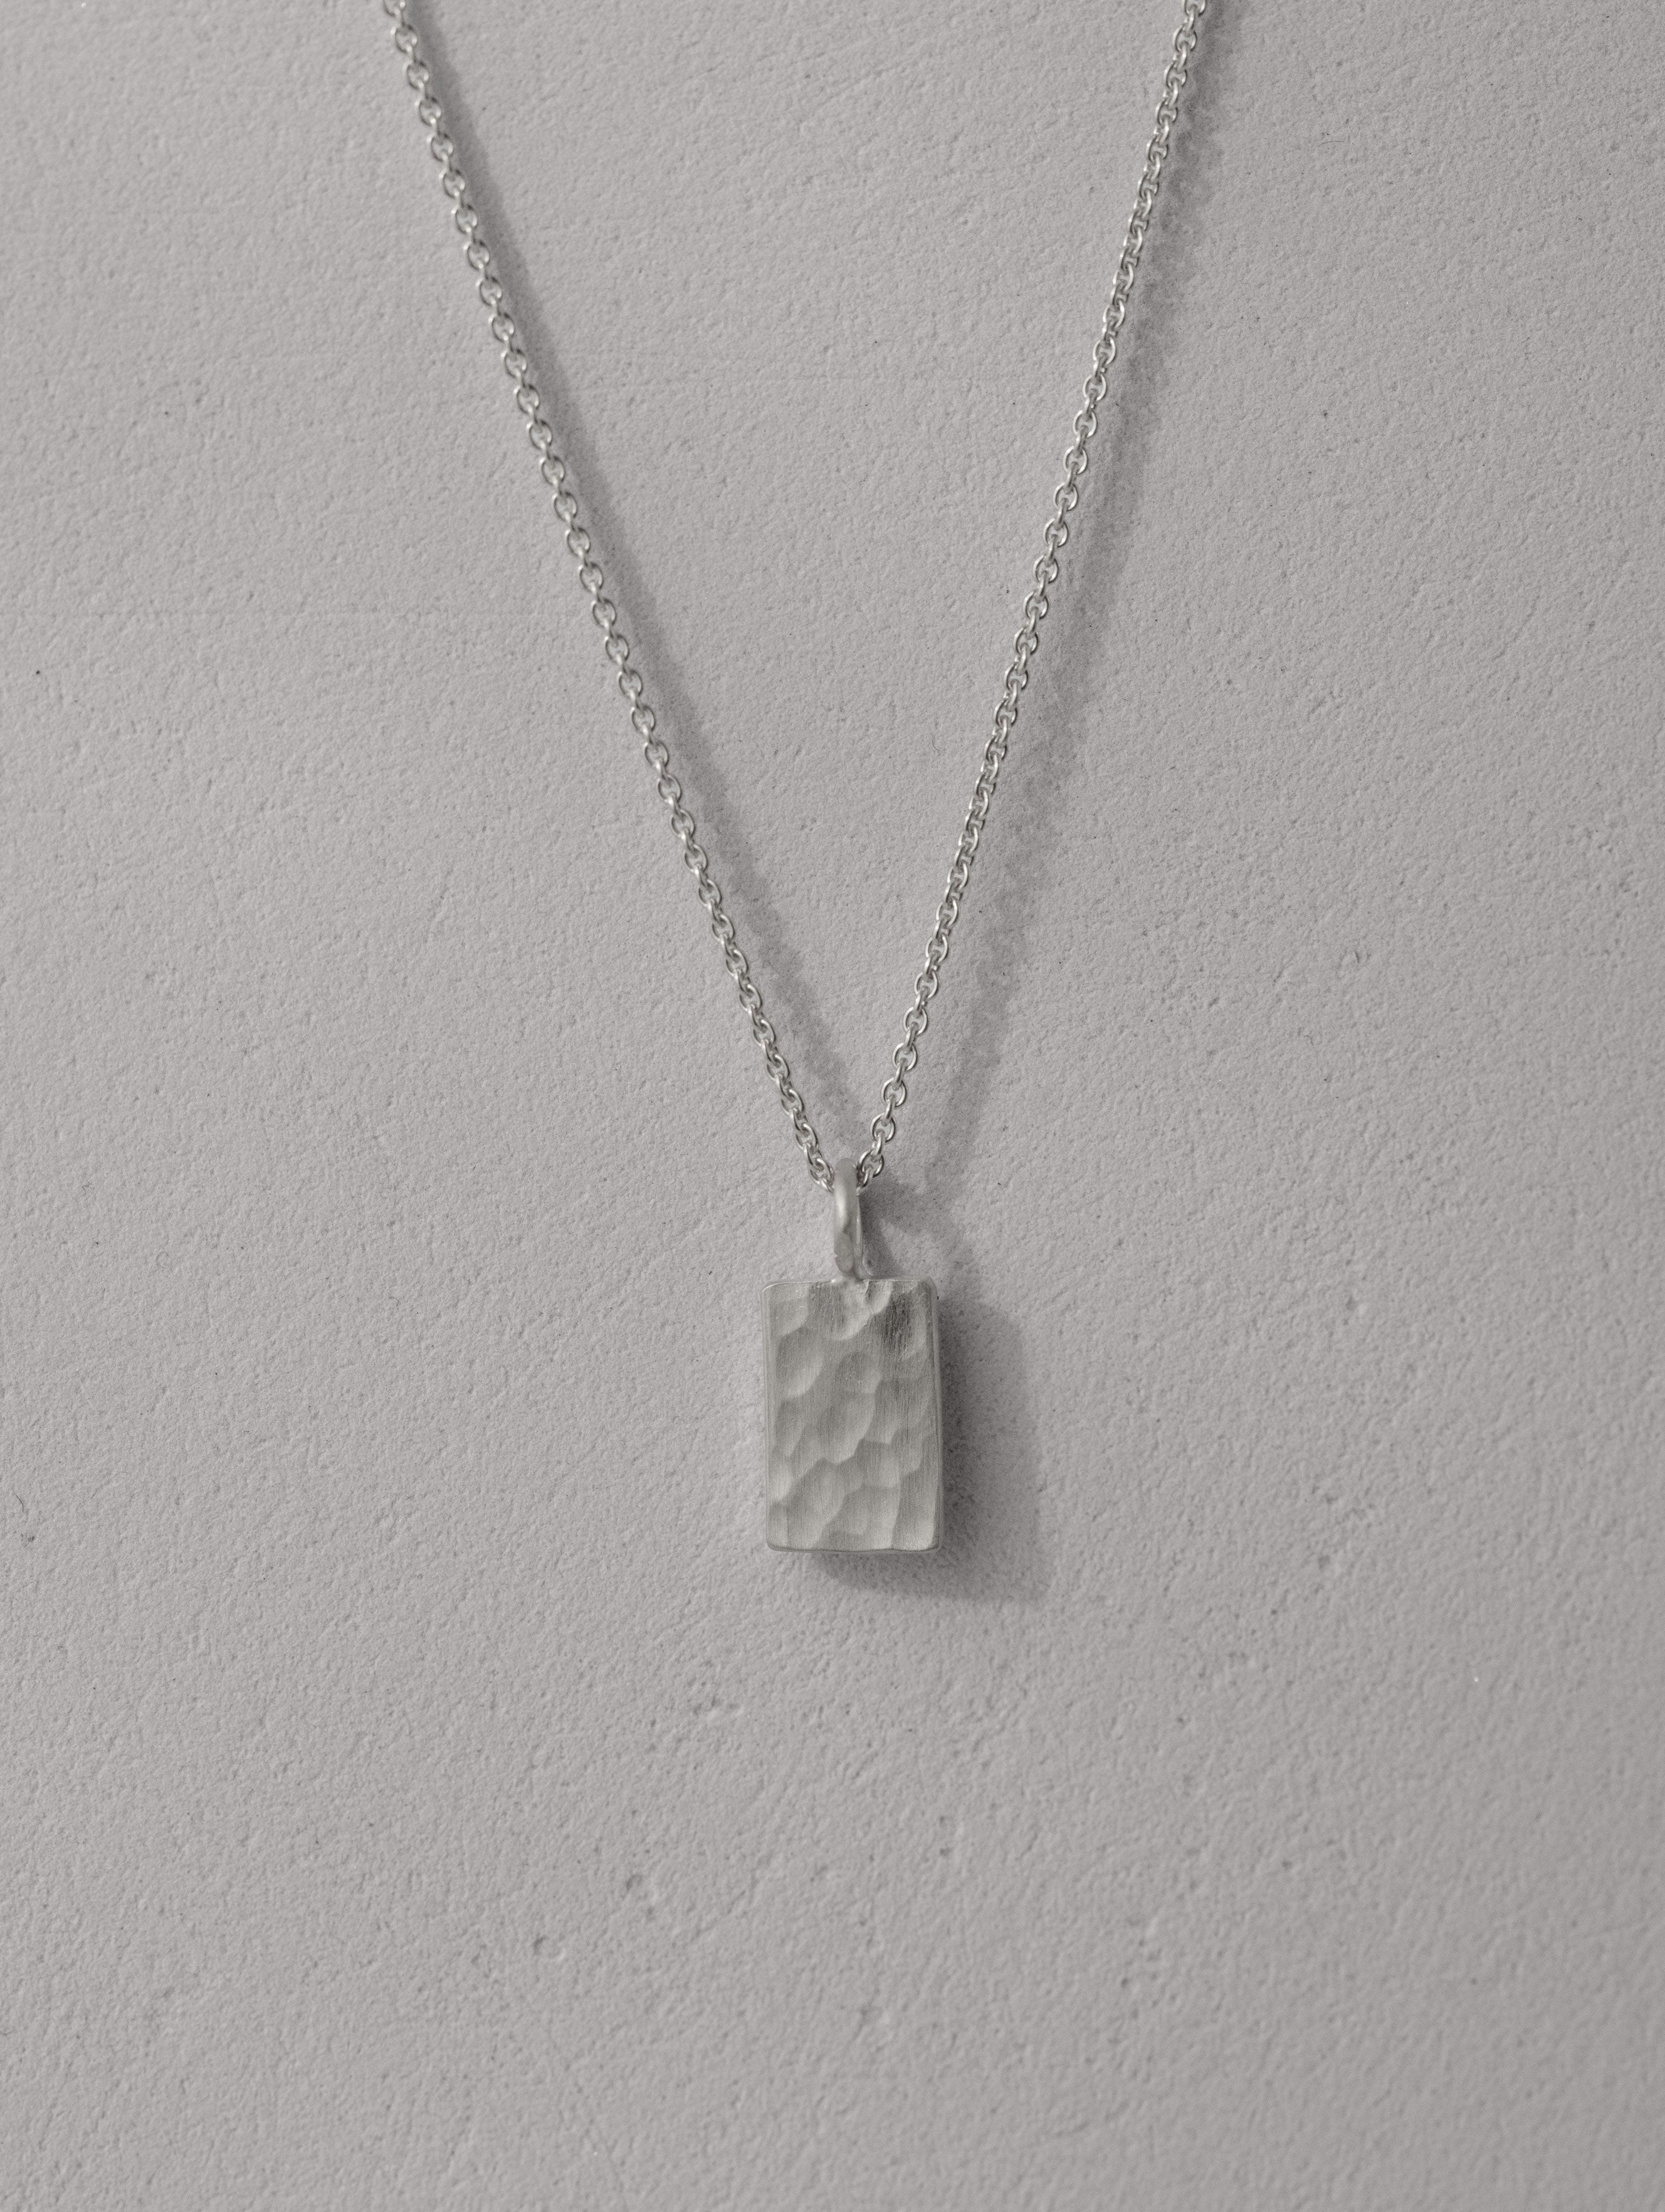 Shape Necklace - Small Tag